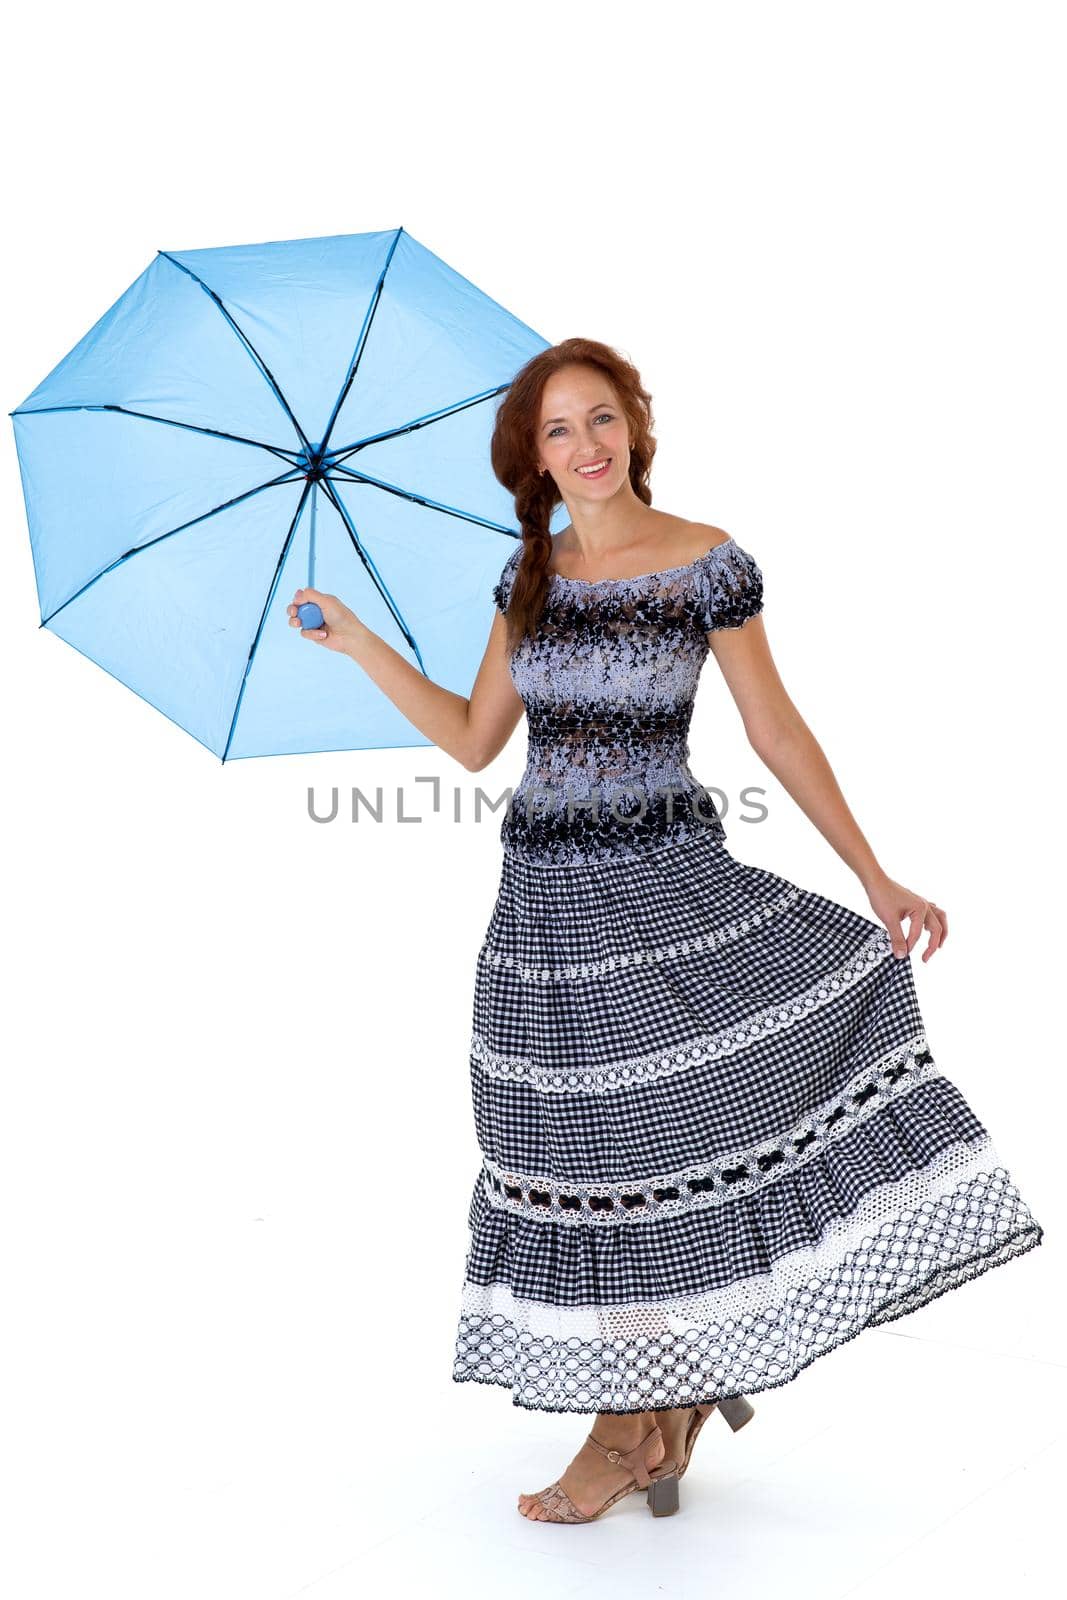 Happy girl holding umbrella above her head at arm length. Beautiful woman wearing summer dress walking under umbrella. Full length portrait of joyful woman smiling at camera against white background.